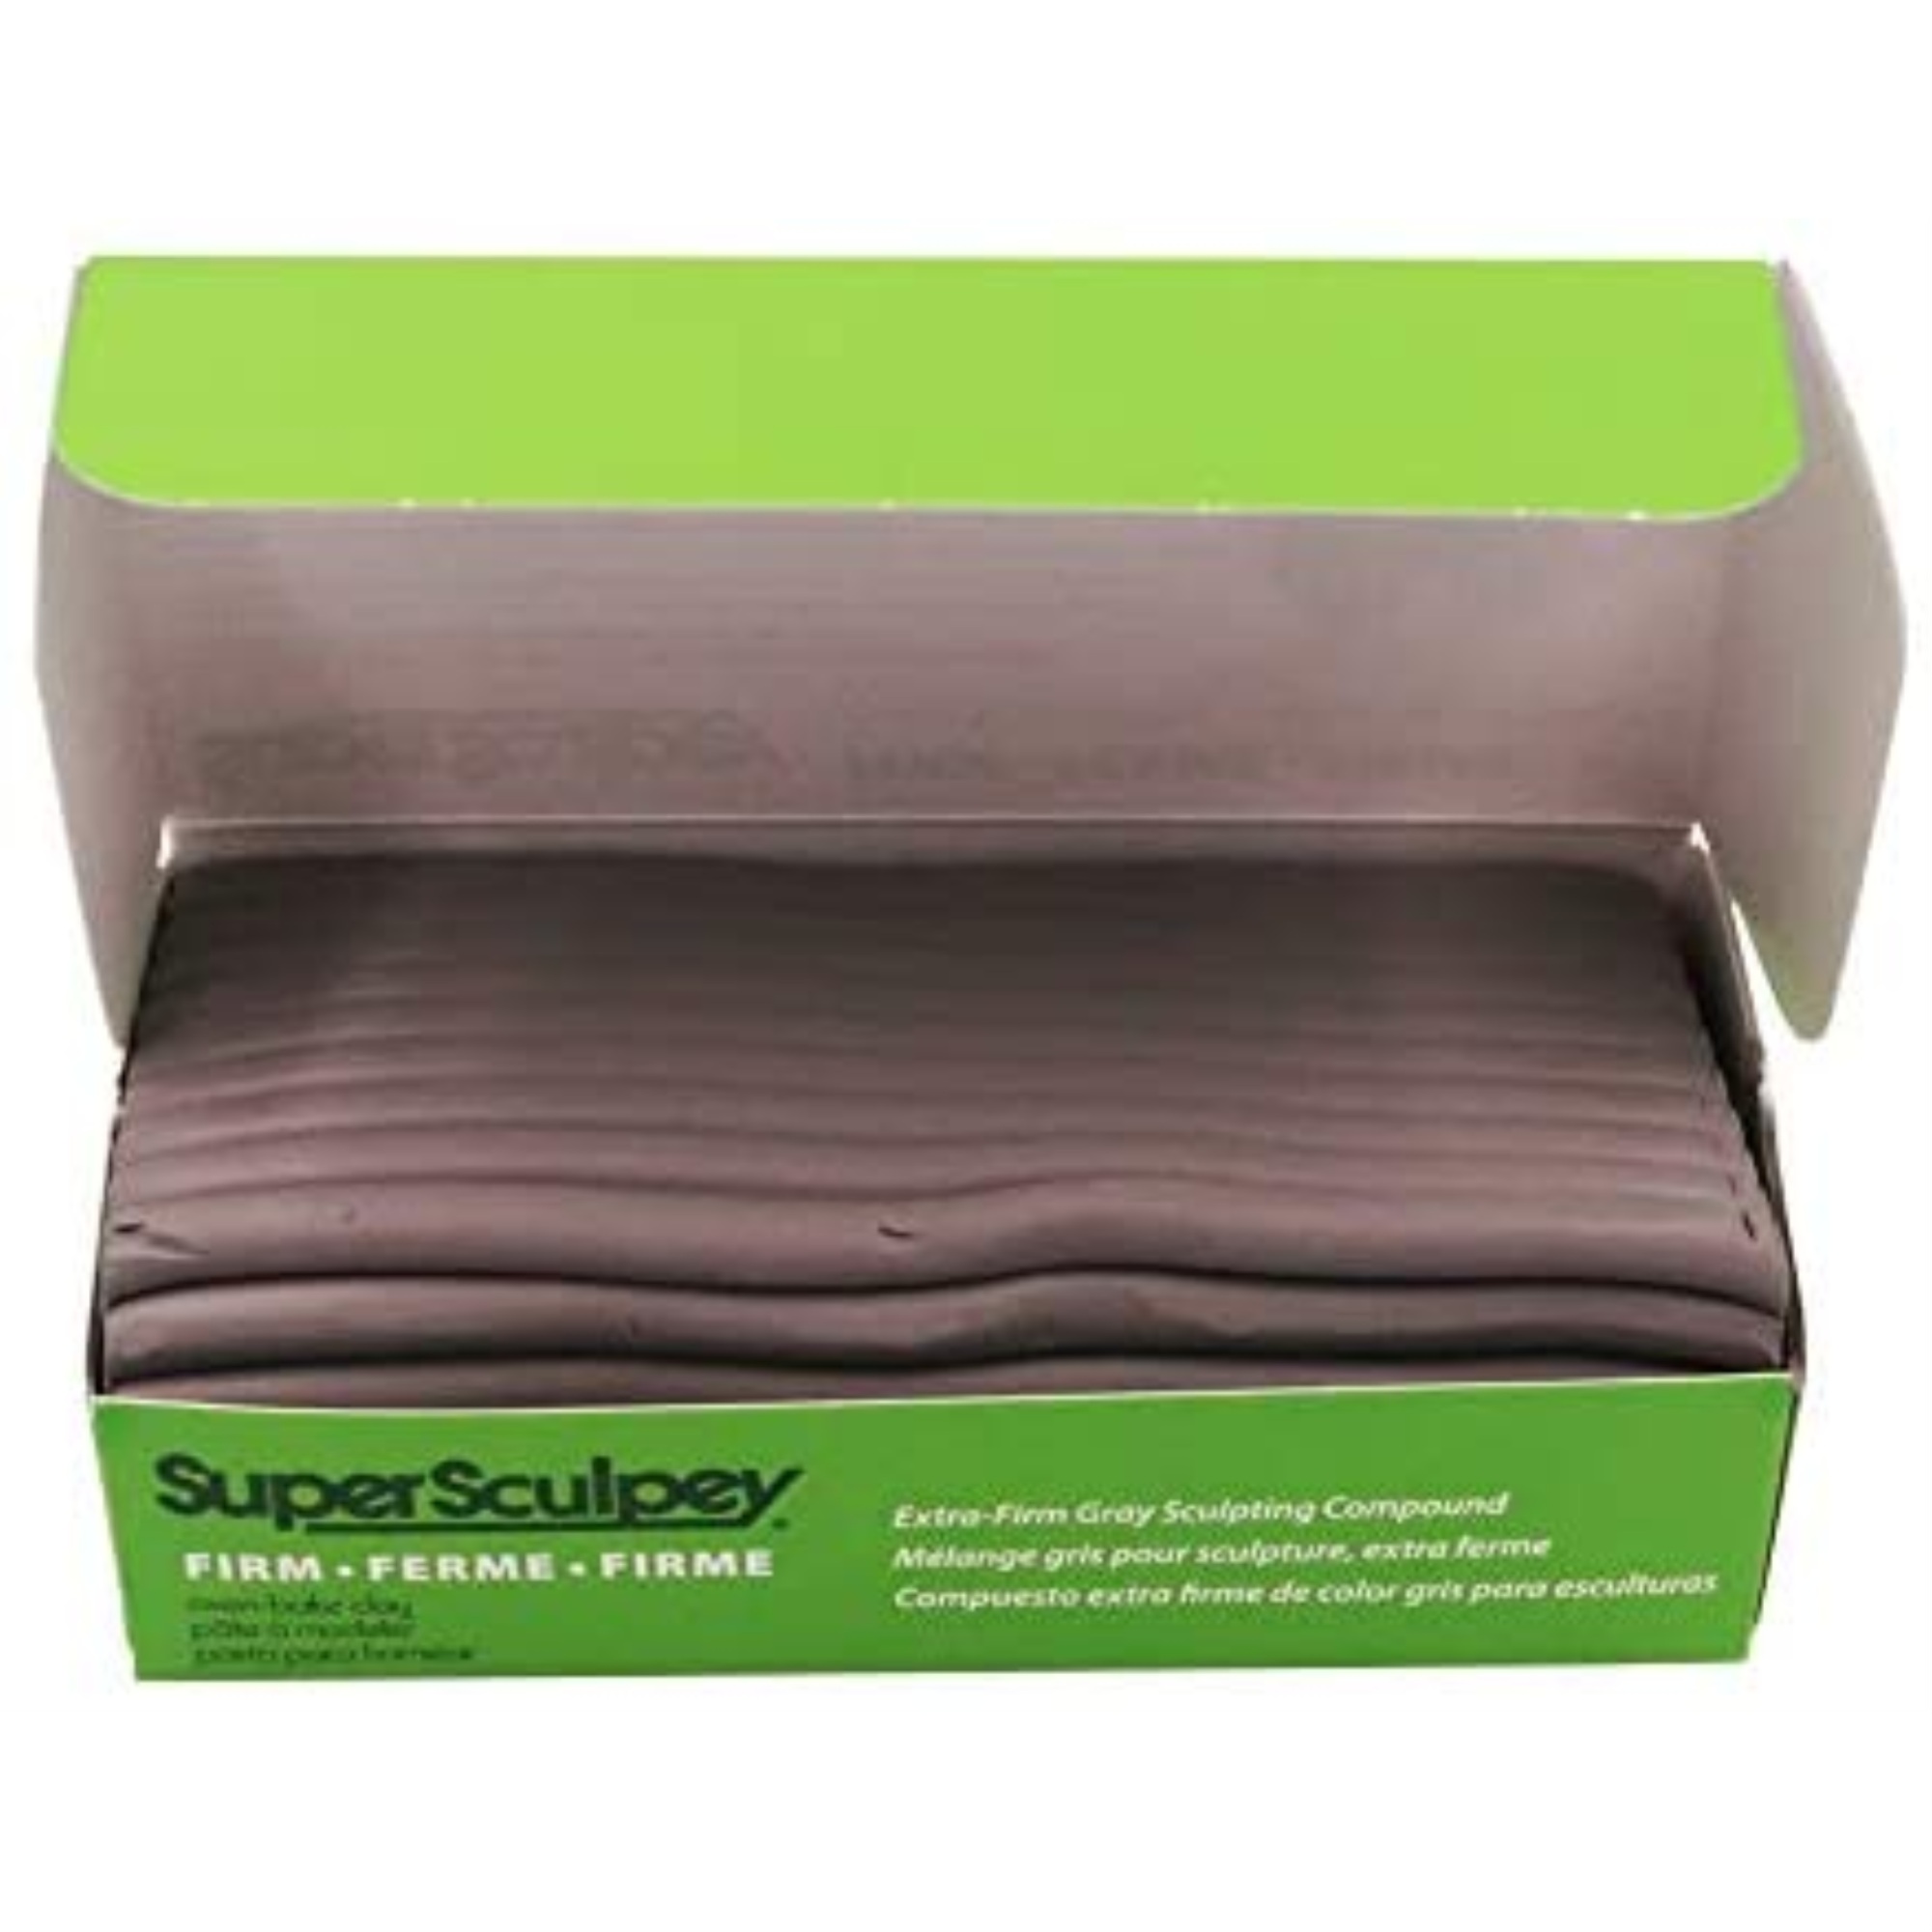 Super Sculpey Firm Gray, Premium, Non Toxic, Firm, Sculpting Modeling Polymer clay, Oven Bake Clay, 1 pound bar. - image 2 of 5